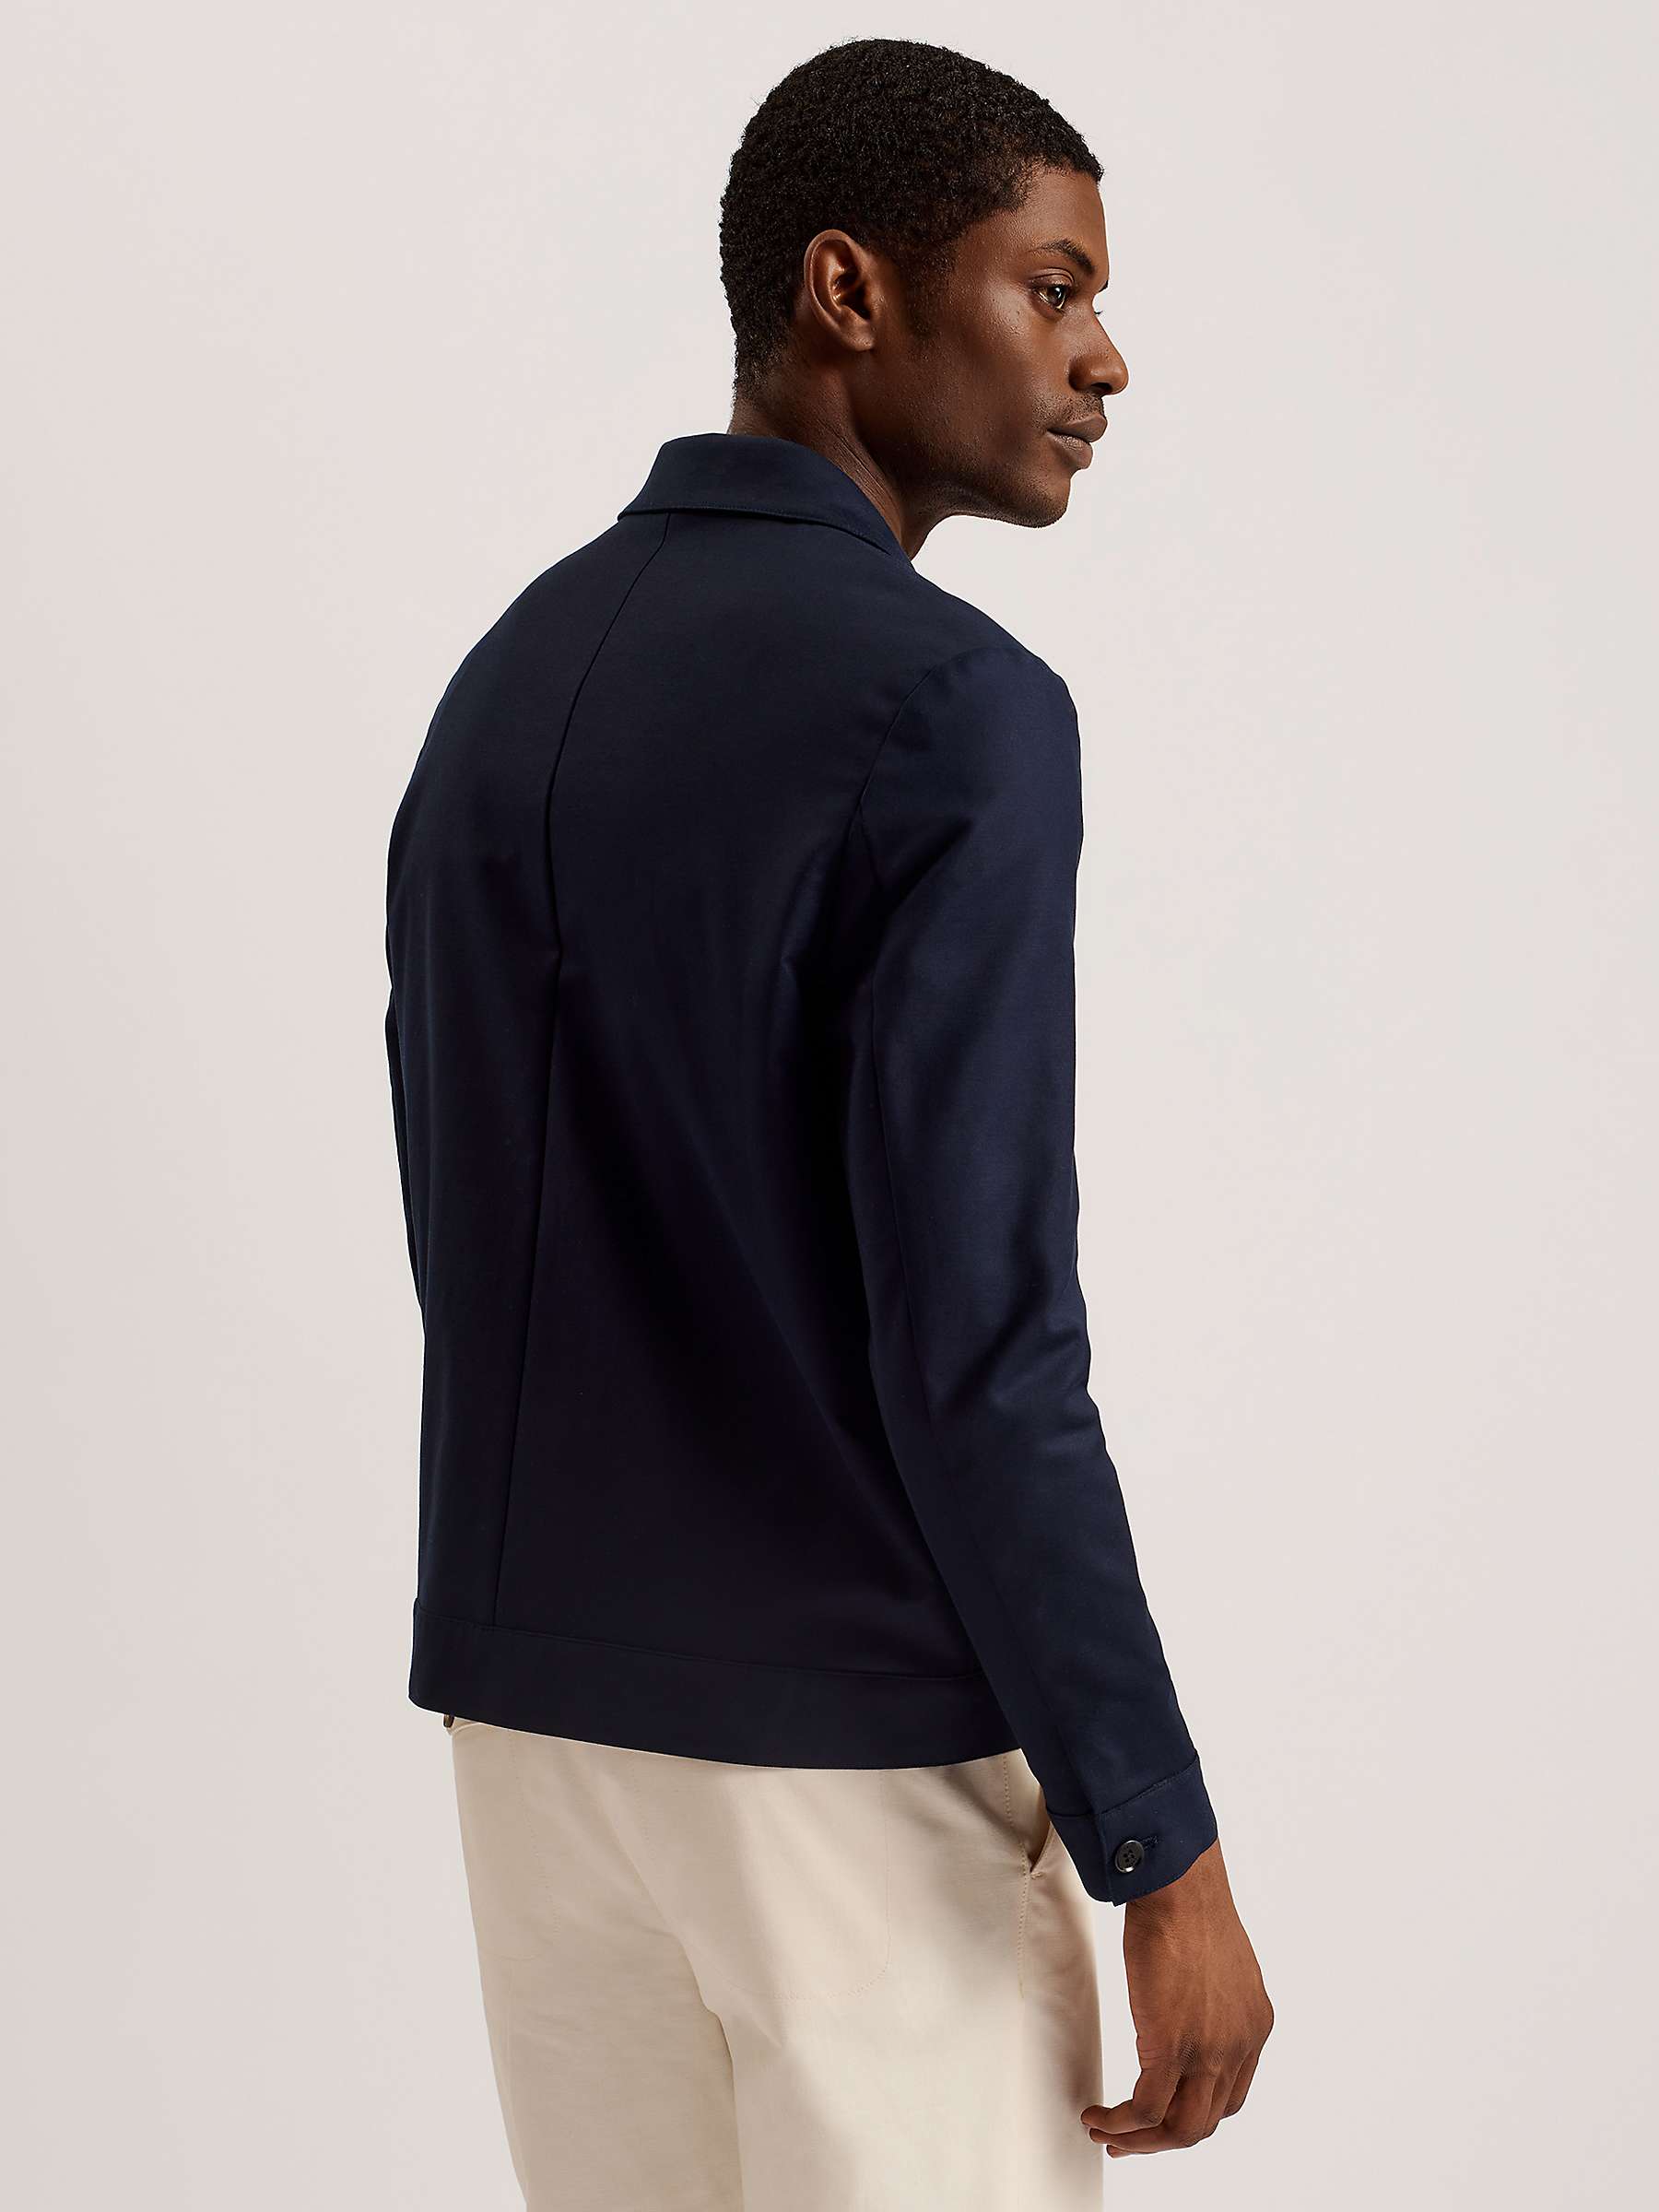 Buy Ted Baker Felix Compact Cotton Chore Jacket Online at johnlewis.com